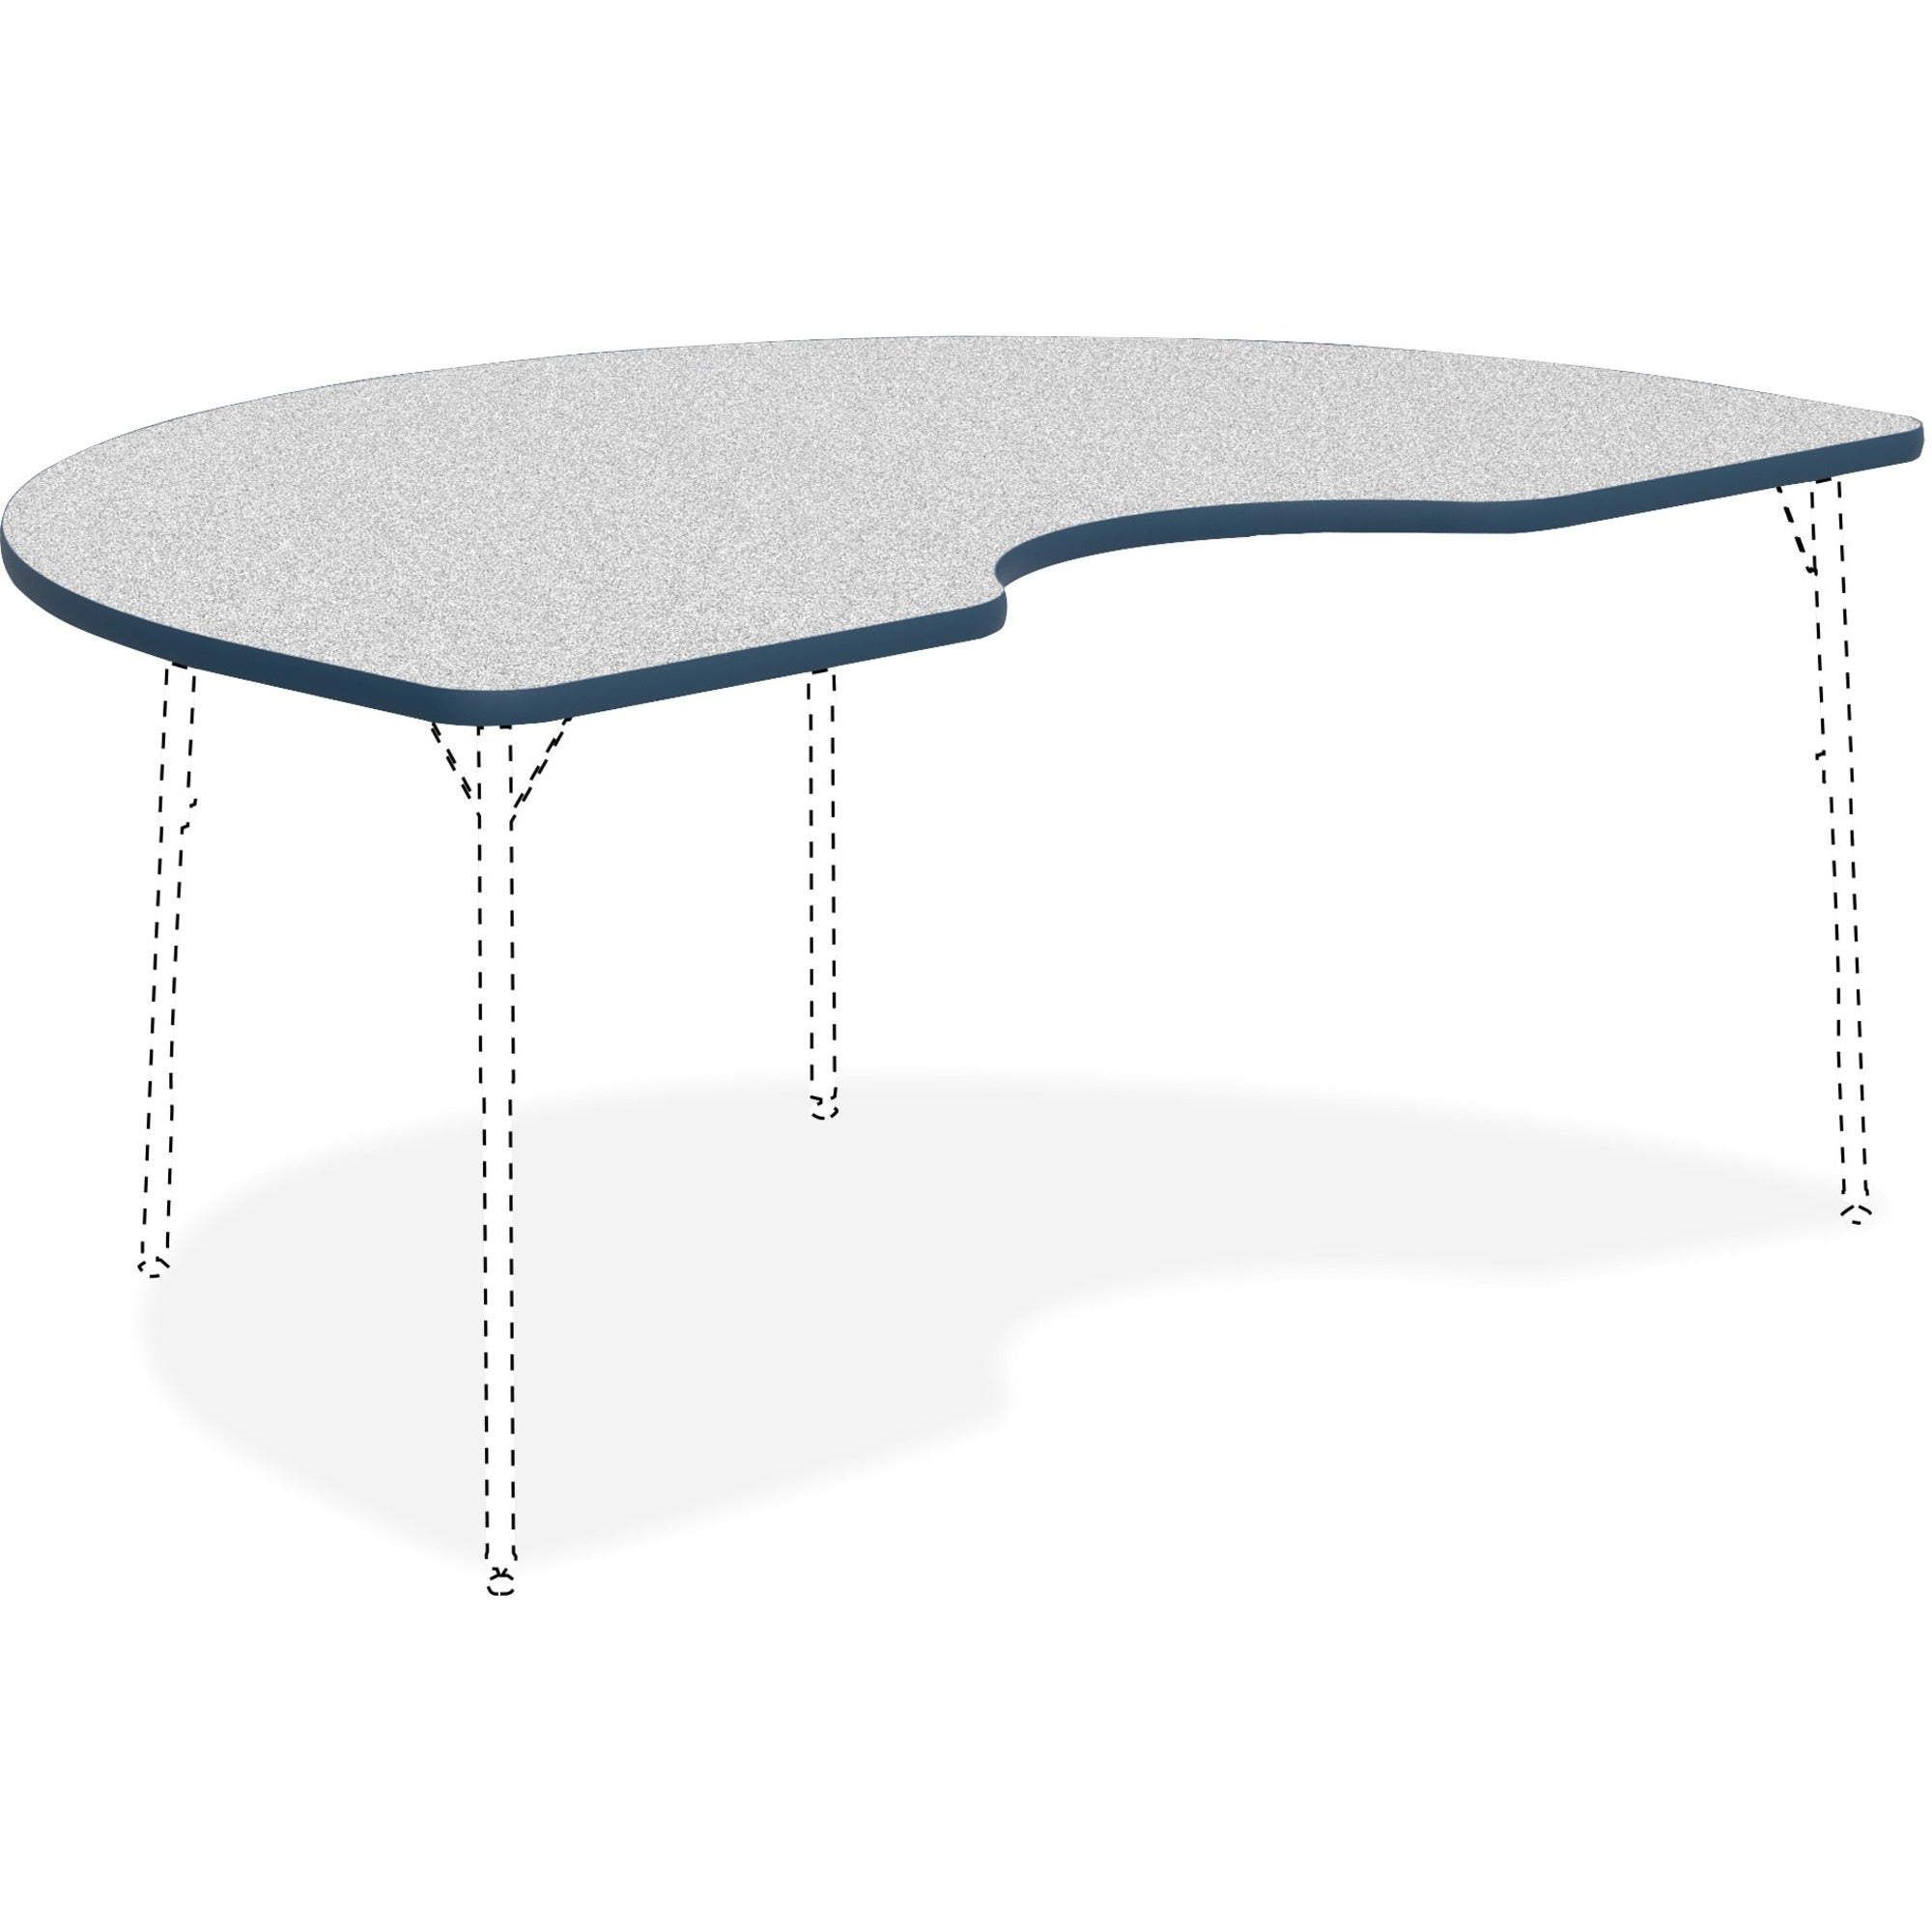 lorell-classroom-activity-tabletop-for-table-topgray-nebula-kidney-shaped-high-pressure-laminate-hpl-top-x-72-table-top-width-x-48-table-top-depth-x-113-table-top-thickness-1-each_llr99924 - 1